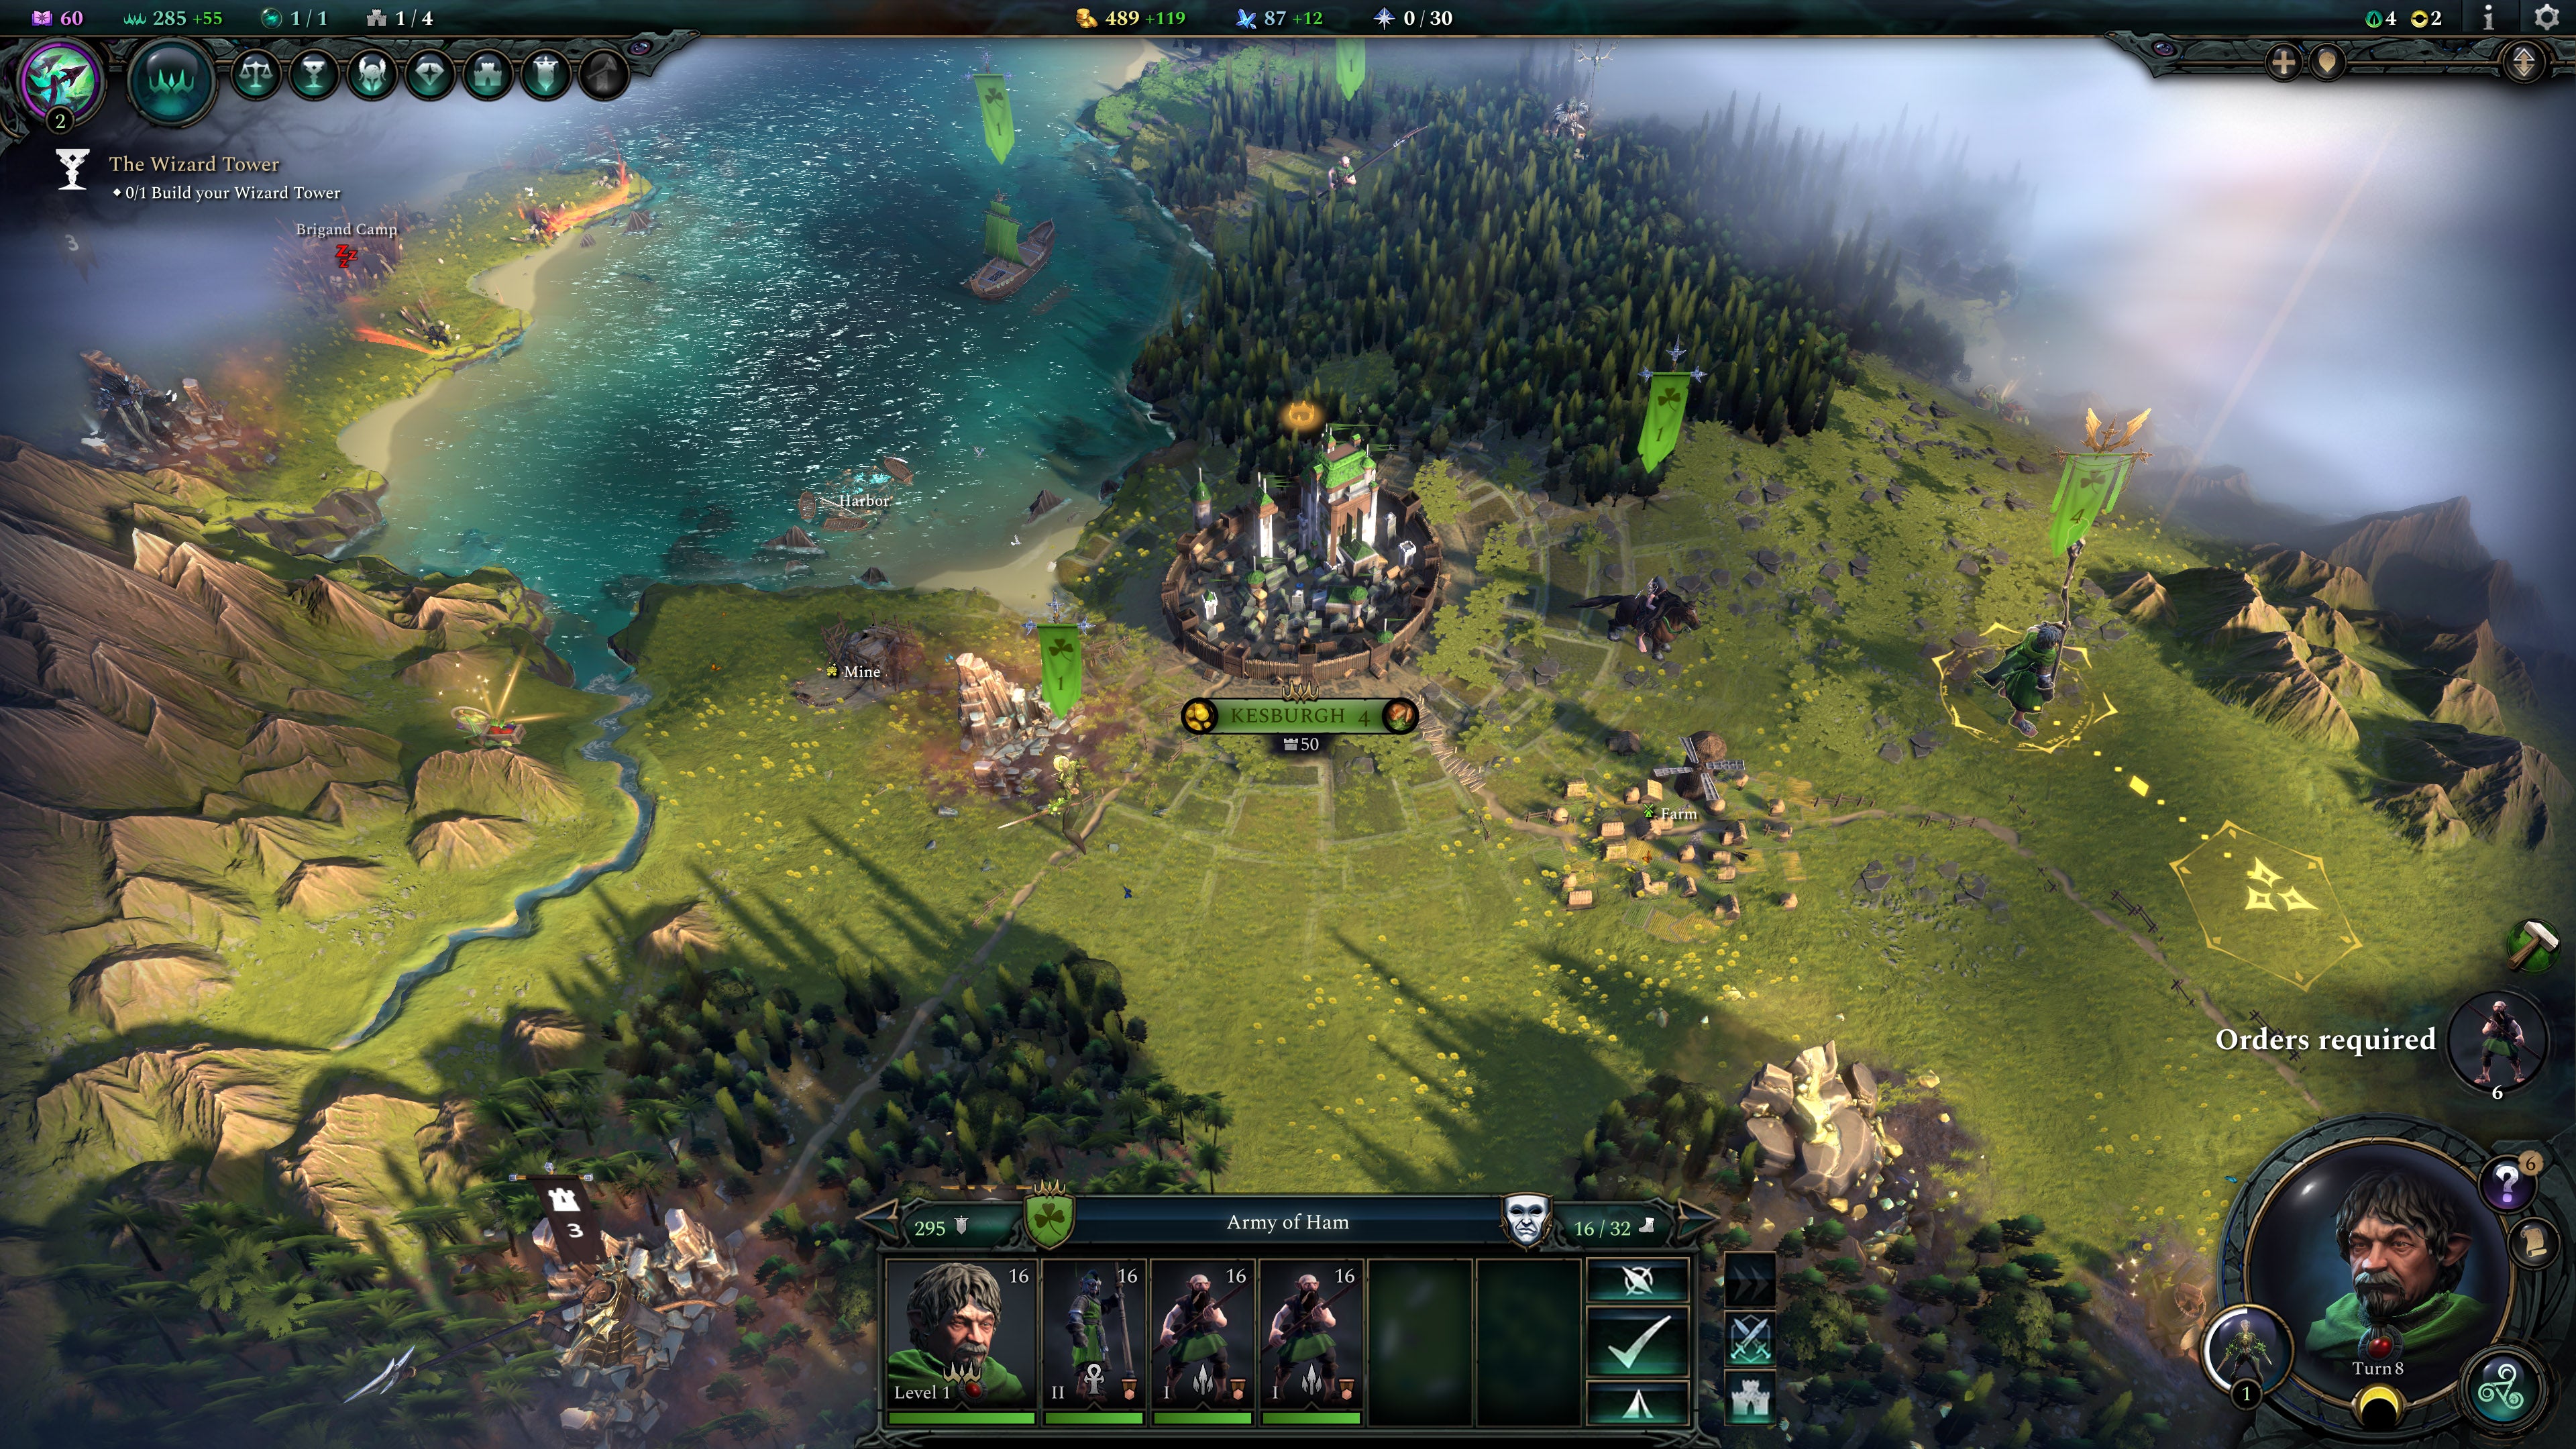 A lush green world with forests and lakes surrounding a city in Age Of Wonders 4